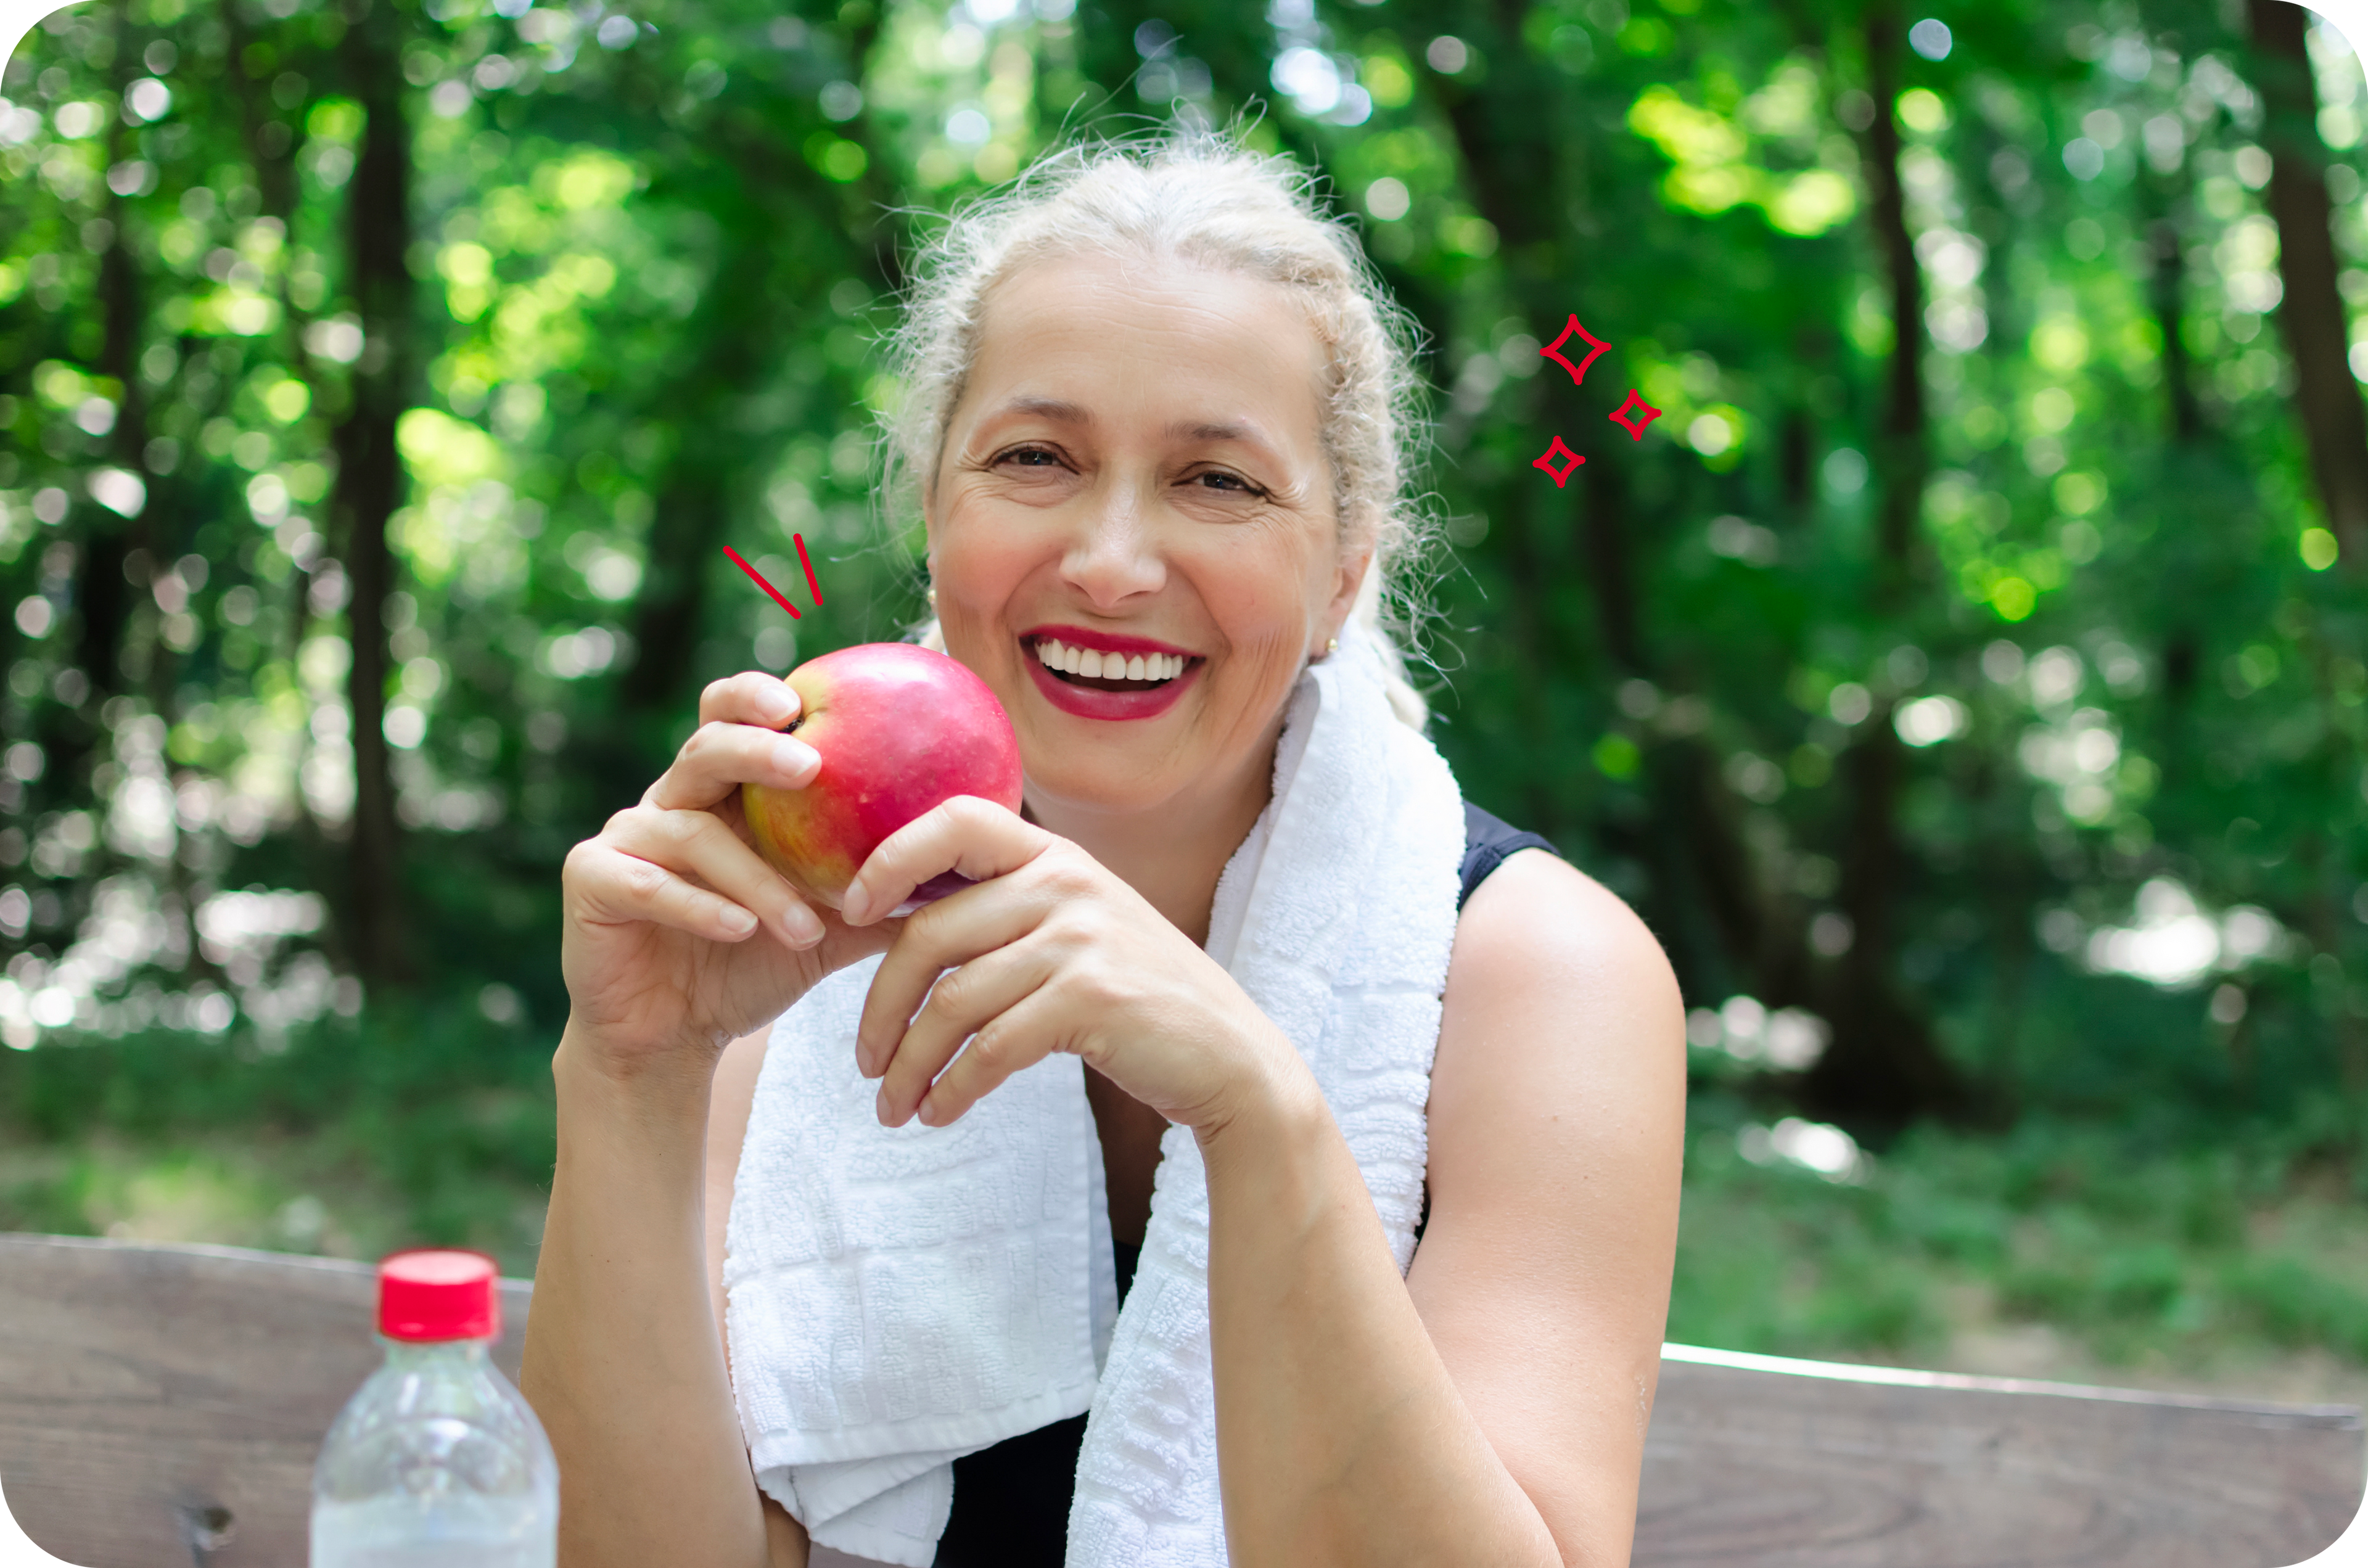 Photo of a smiling woman eating a healthy snack after exercise